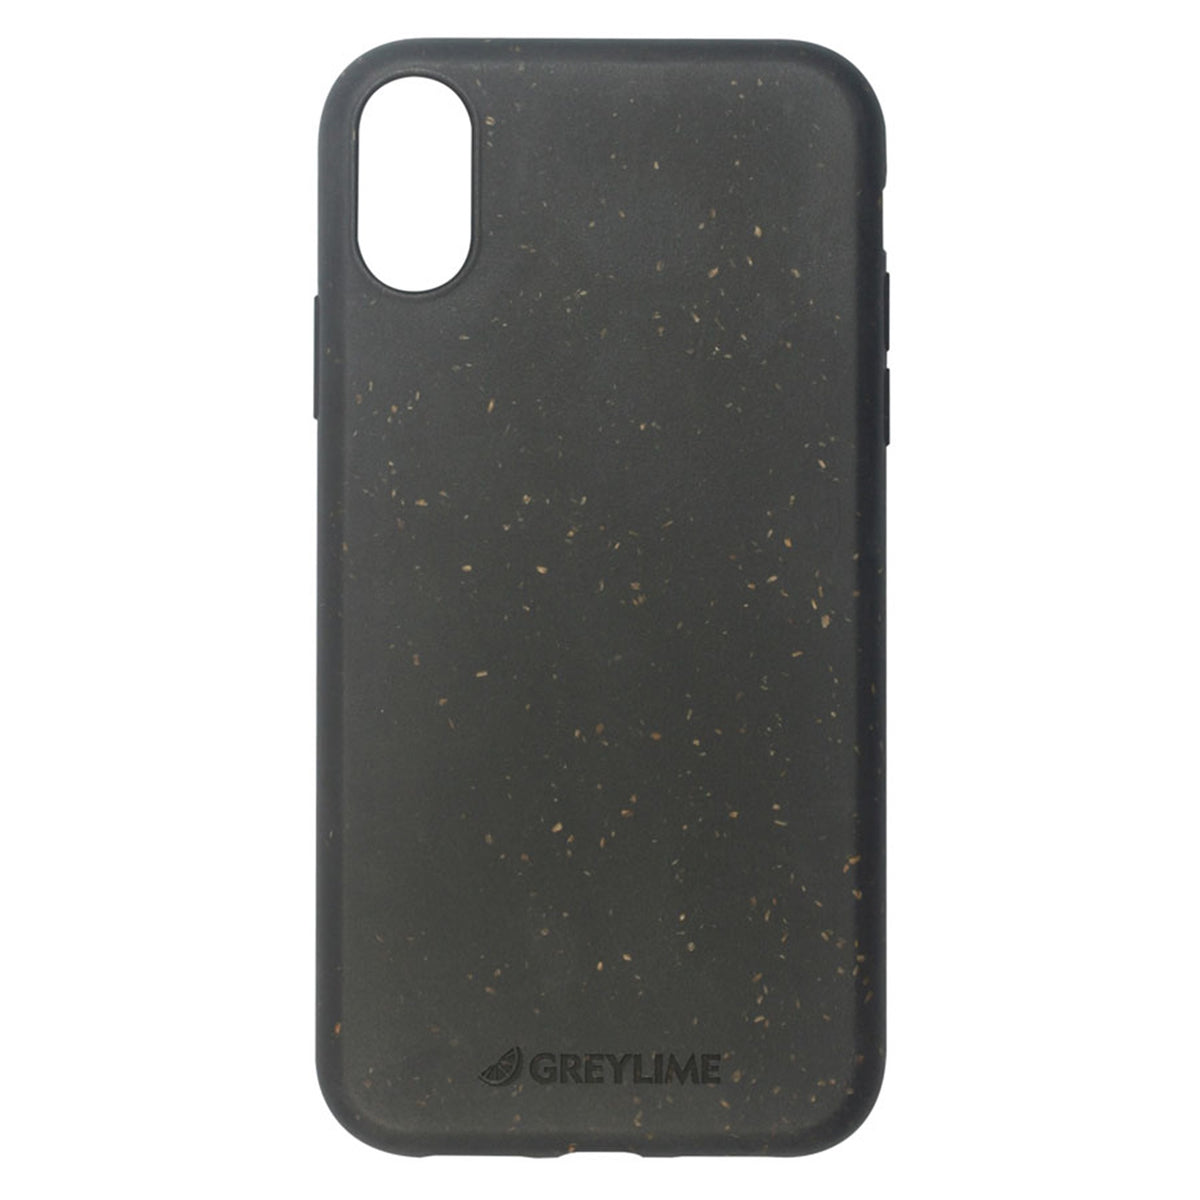 COIPXR06 Greylime Iphone XR Biodegradable Cover Black 1